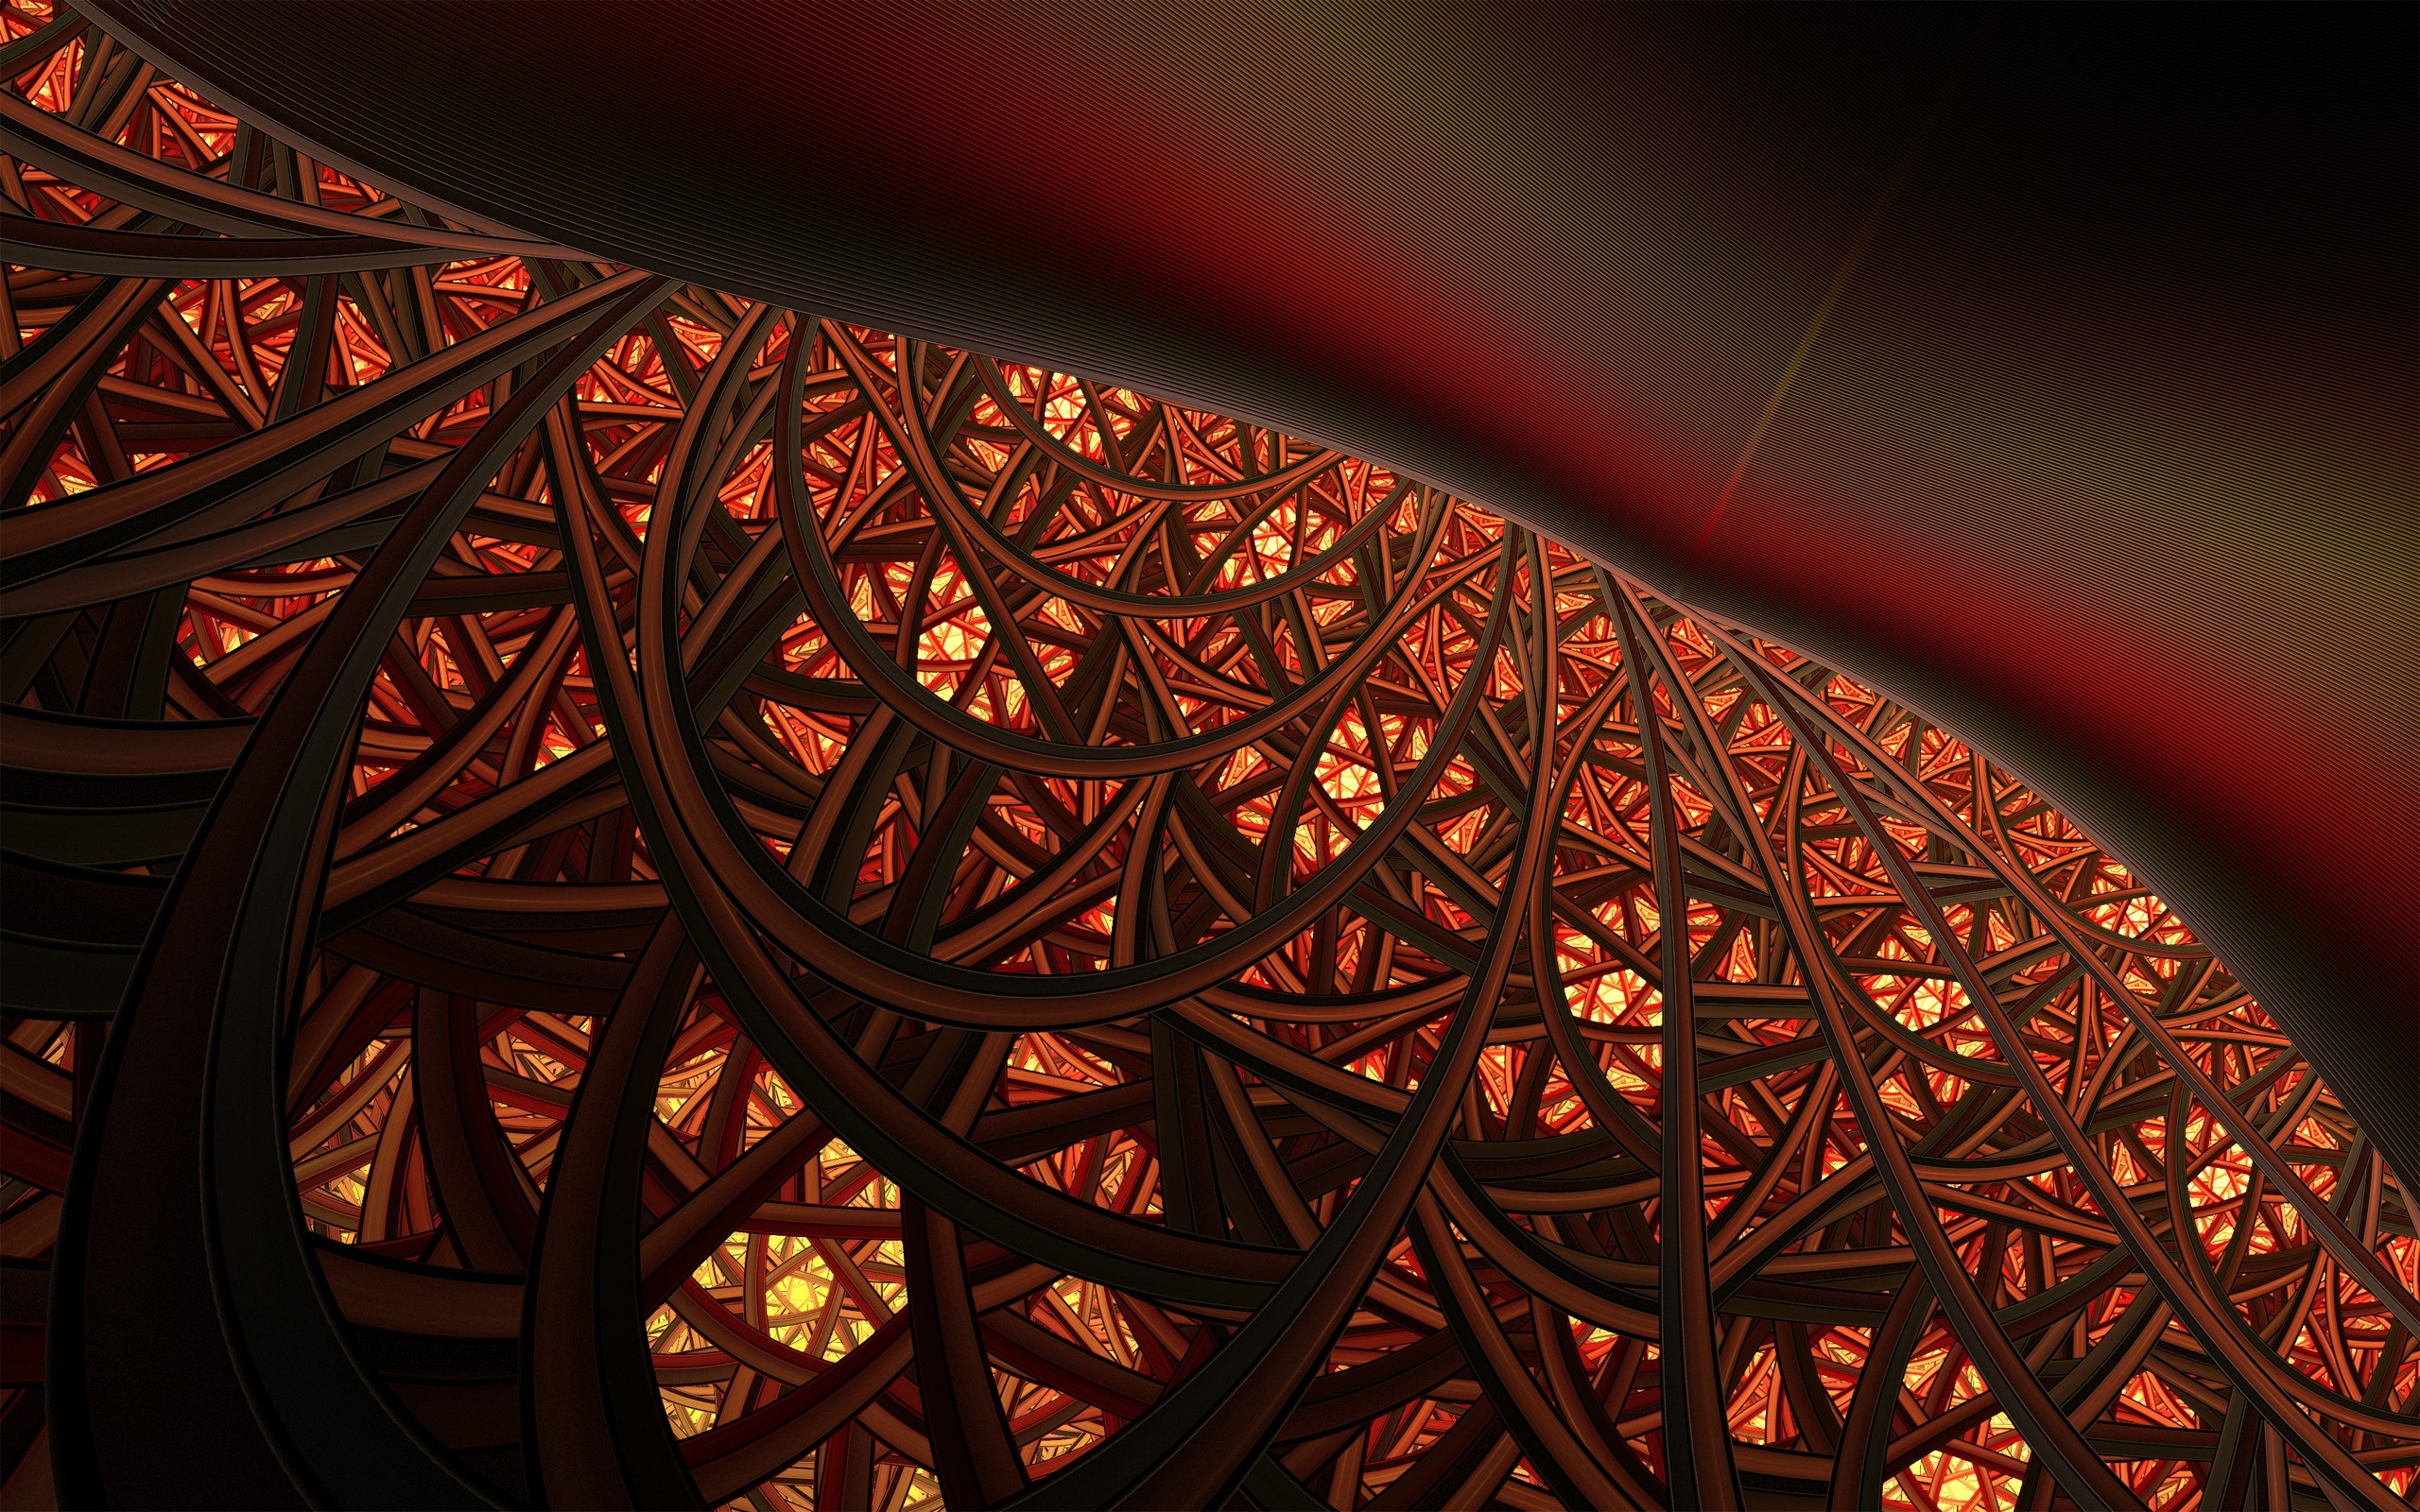 General 2560x1600 abstract digital art red